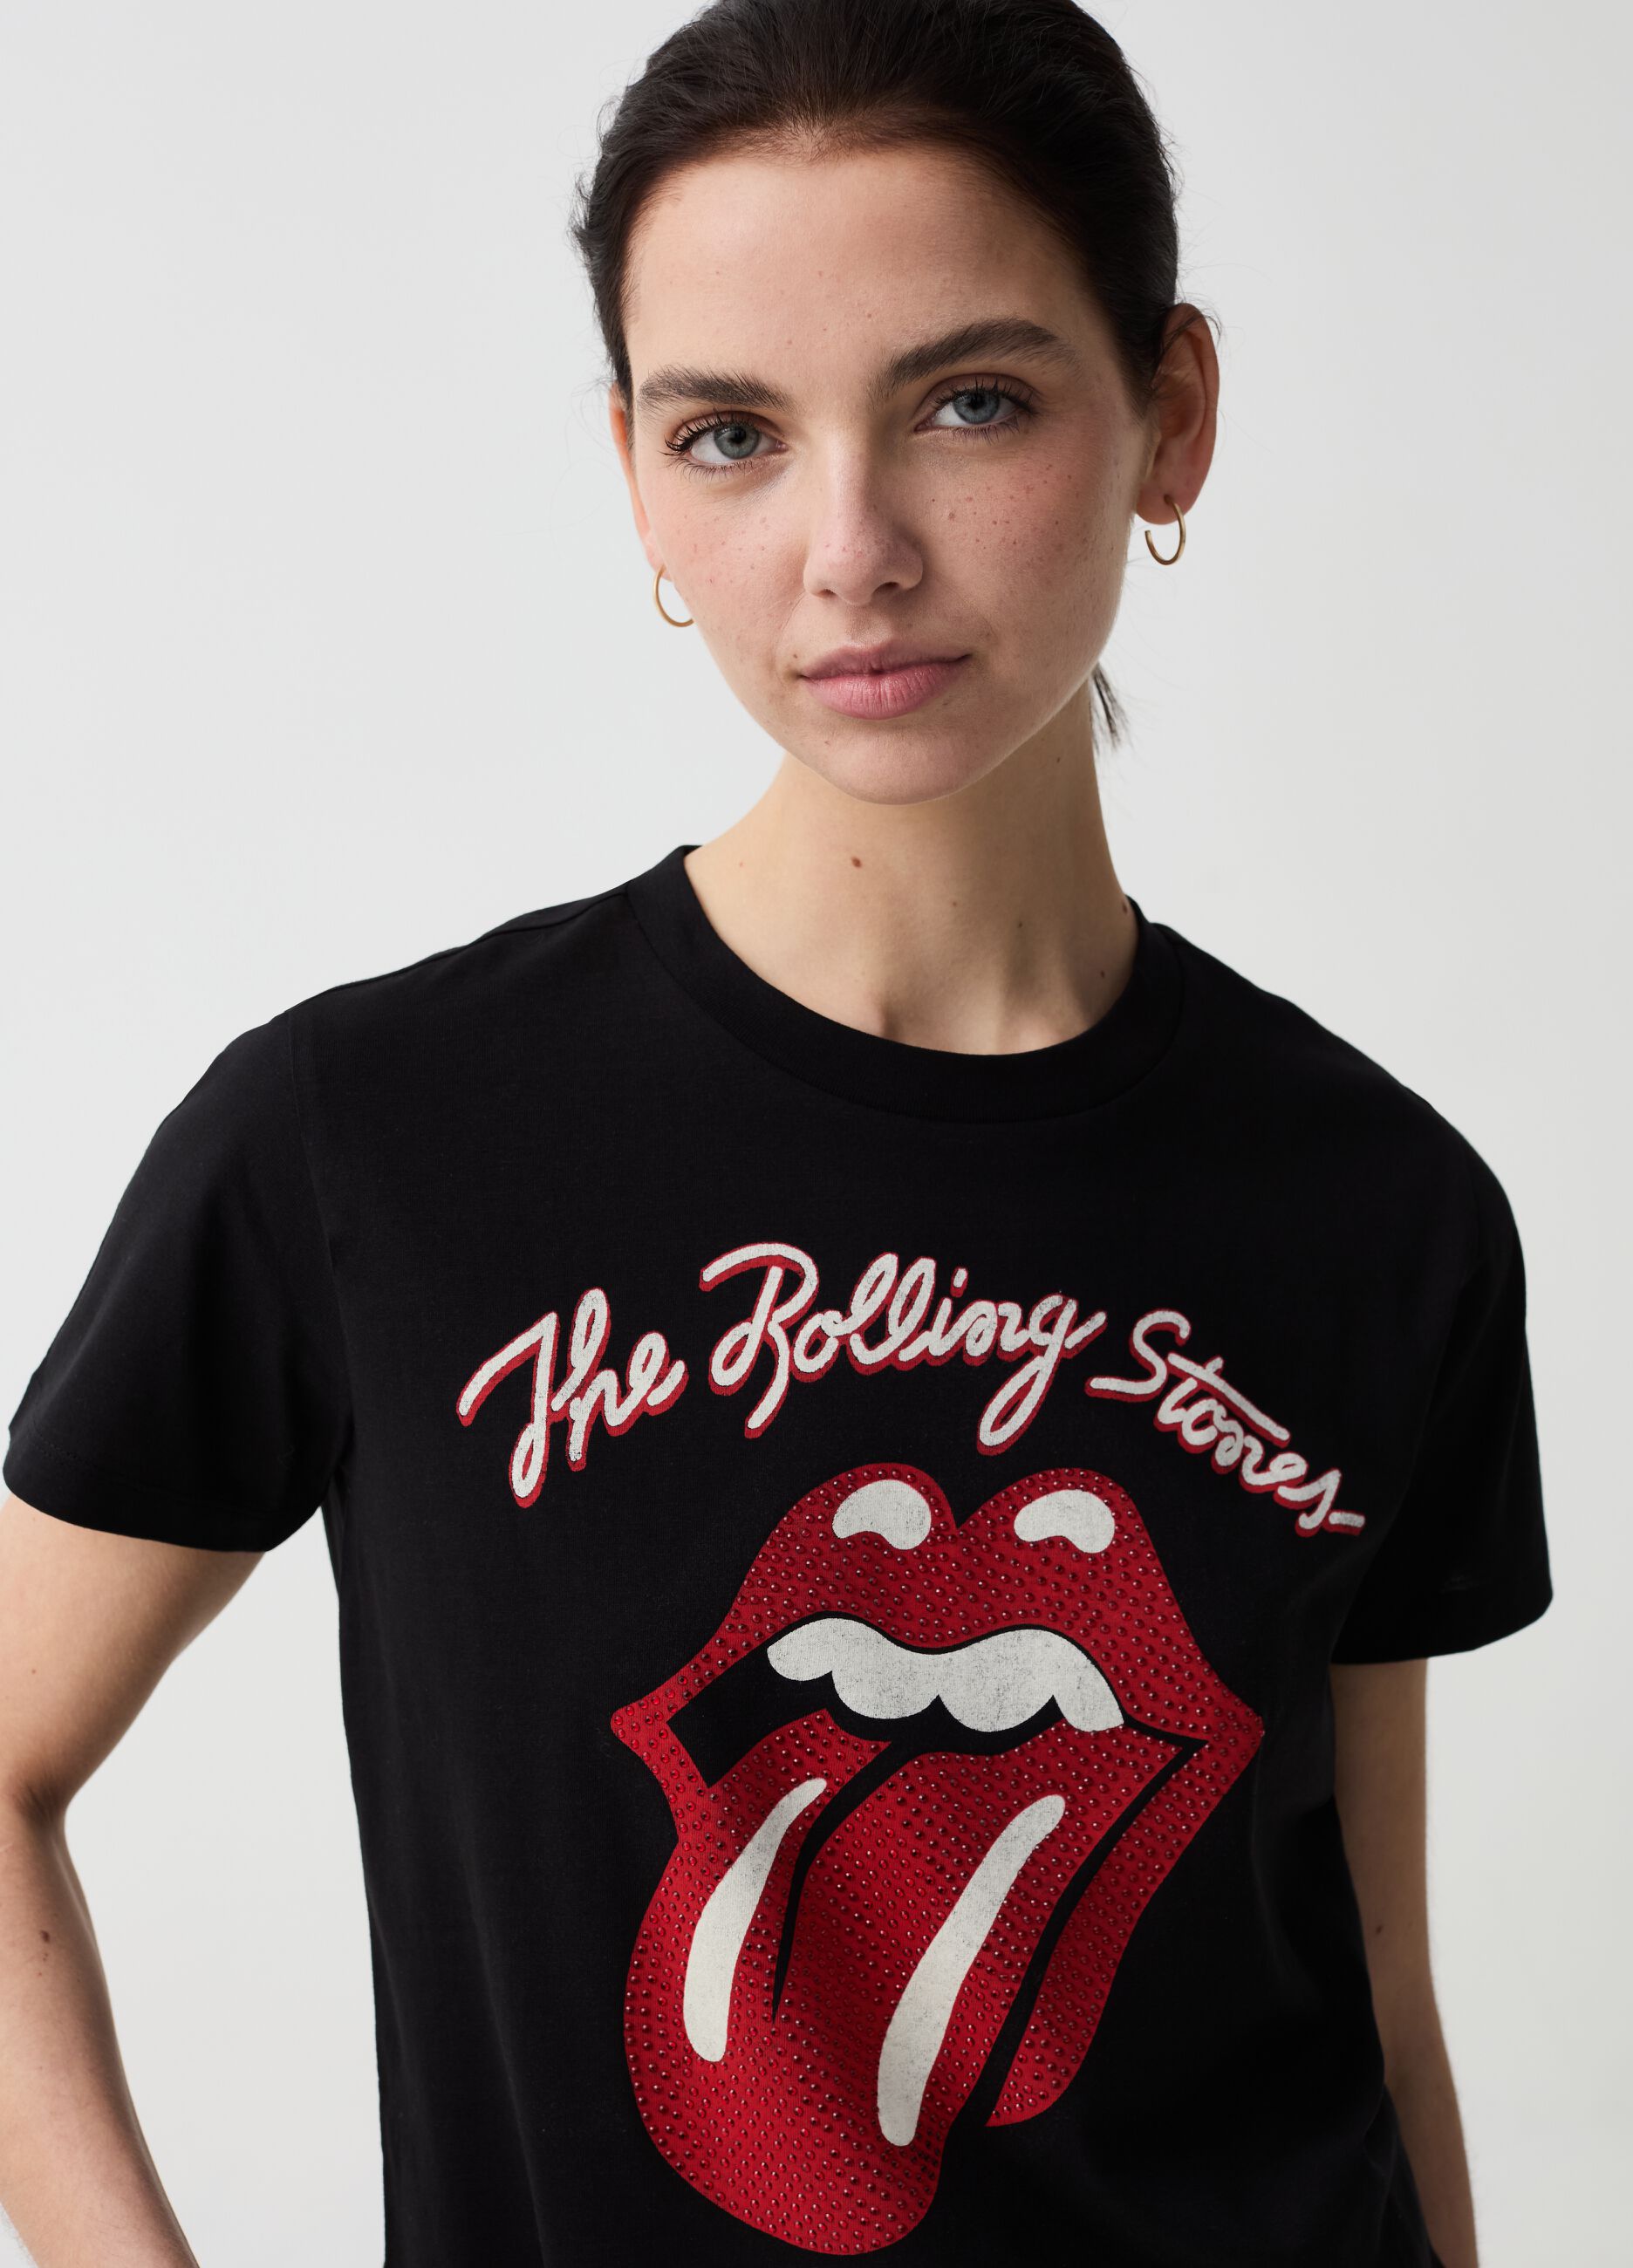 T-shirt stampa logo Rolling Stones con strass